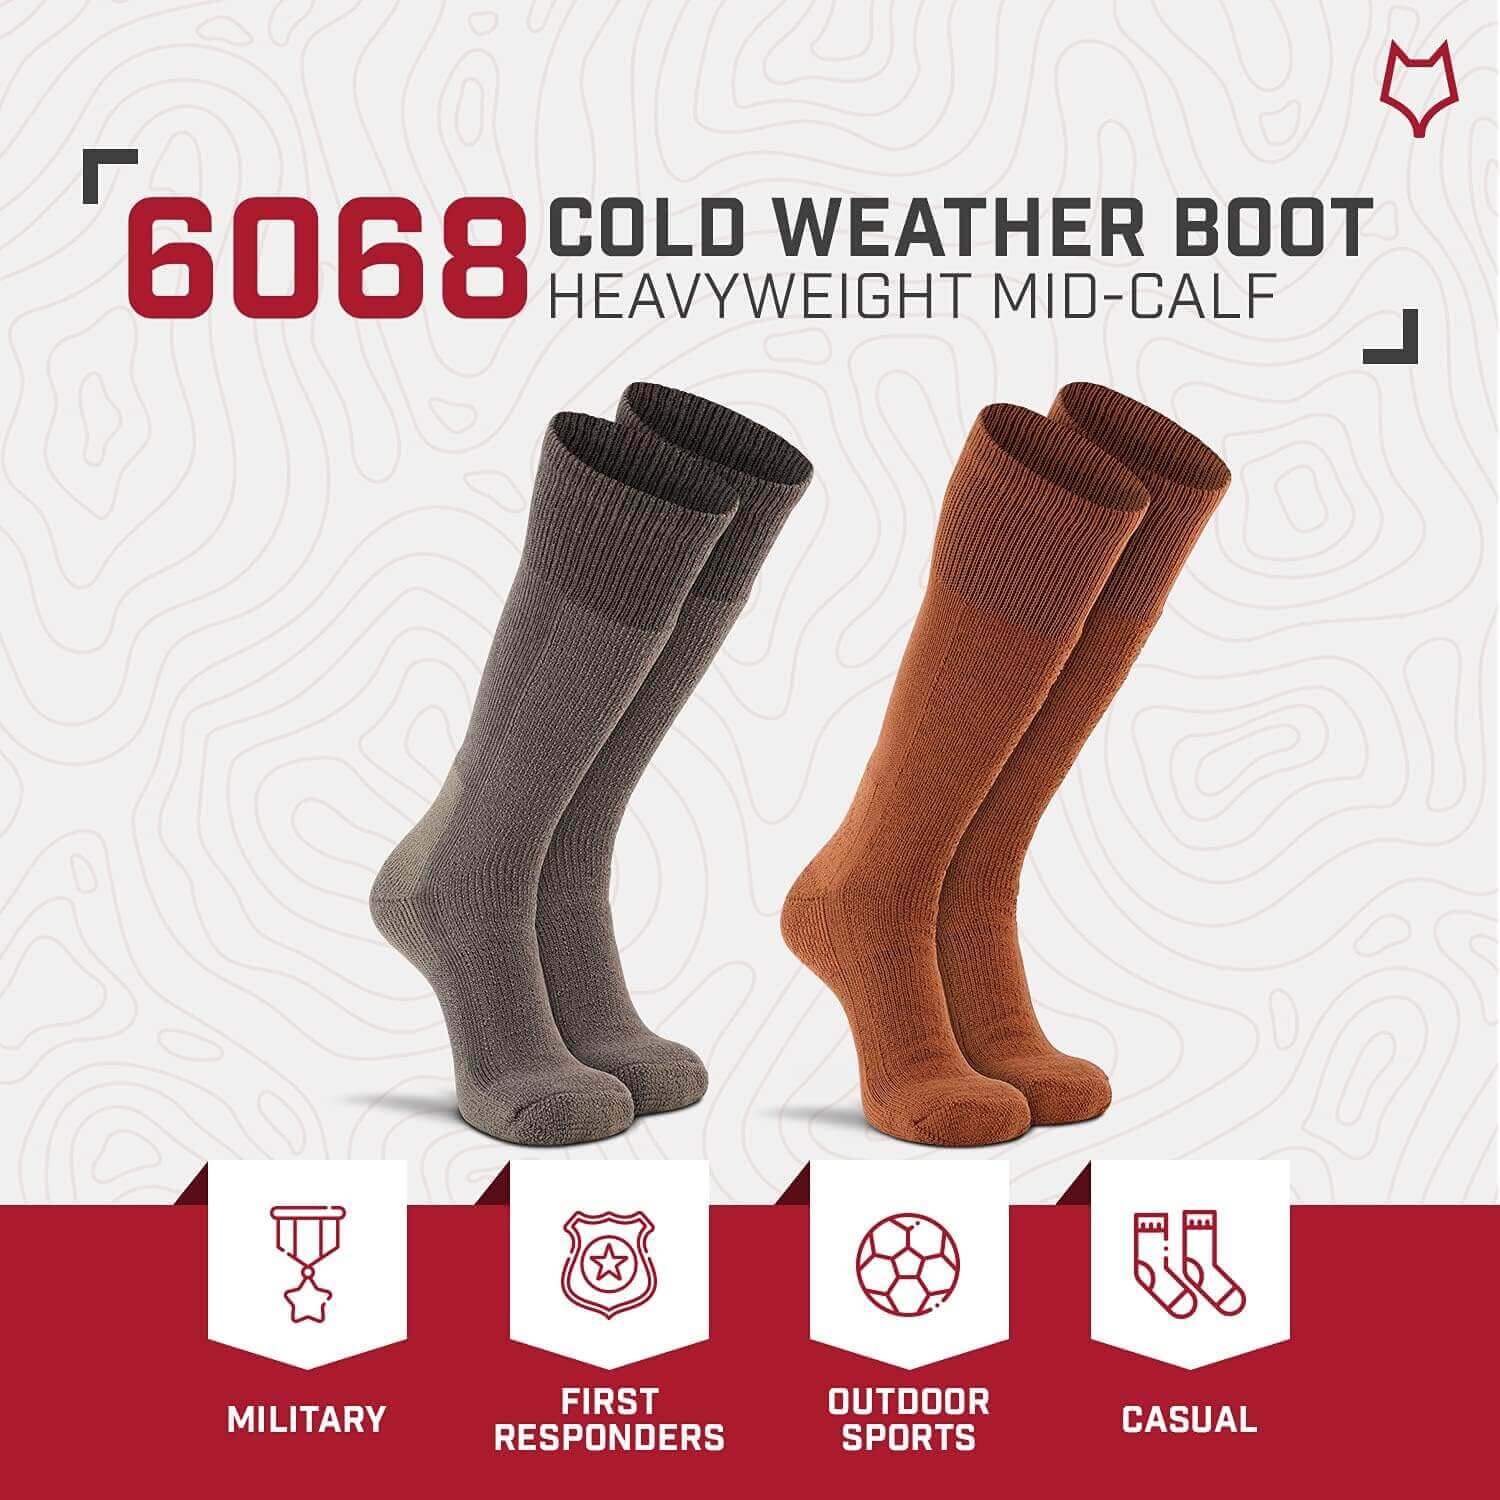 Shop The Latest >Fox River Adult Cold Weather Mid Calf Boot Socks > *Only $17.21*> From The Top Brand > *Fox Riverl* > Shop Now and Get Free Shipping On Orders Over $45.00 >*Shop Earth Foot*